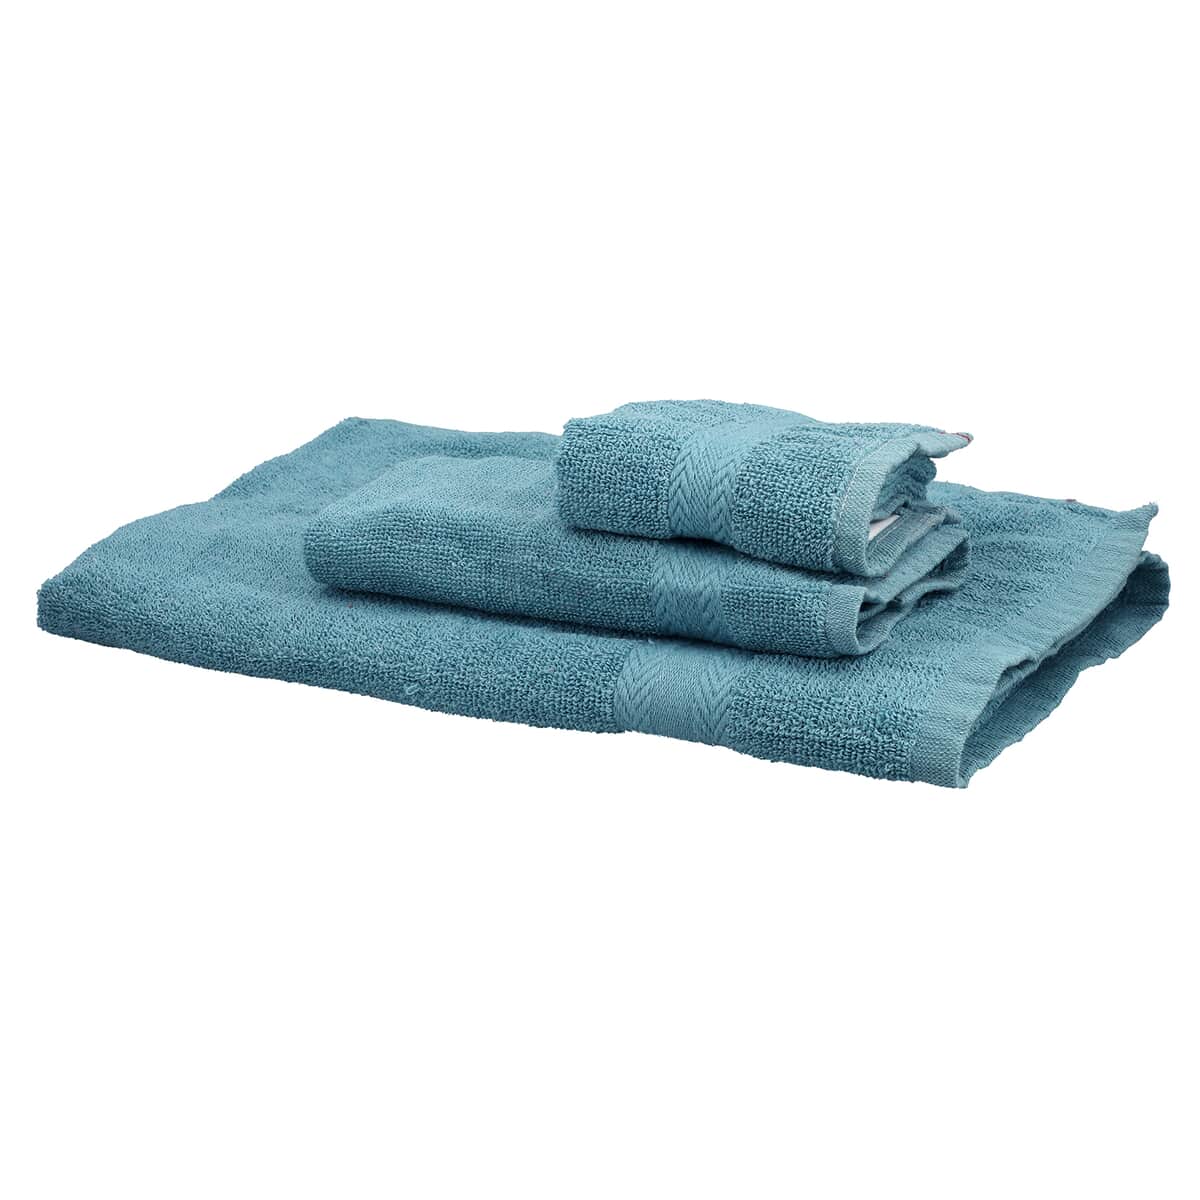 "3 Pc Cotton Towel Set (1 Bath Towel 47x28 in, 1 Hand Towel 20x12 in and 1 Face towel 12x12 inches) COLOR: Mint " image number 6